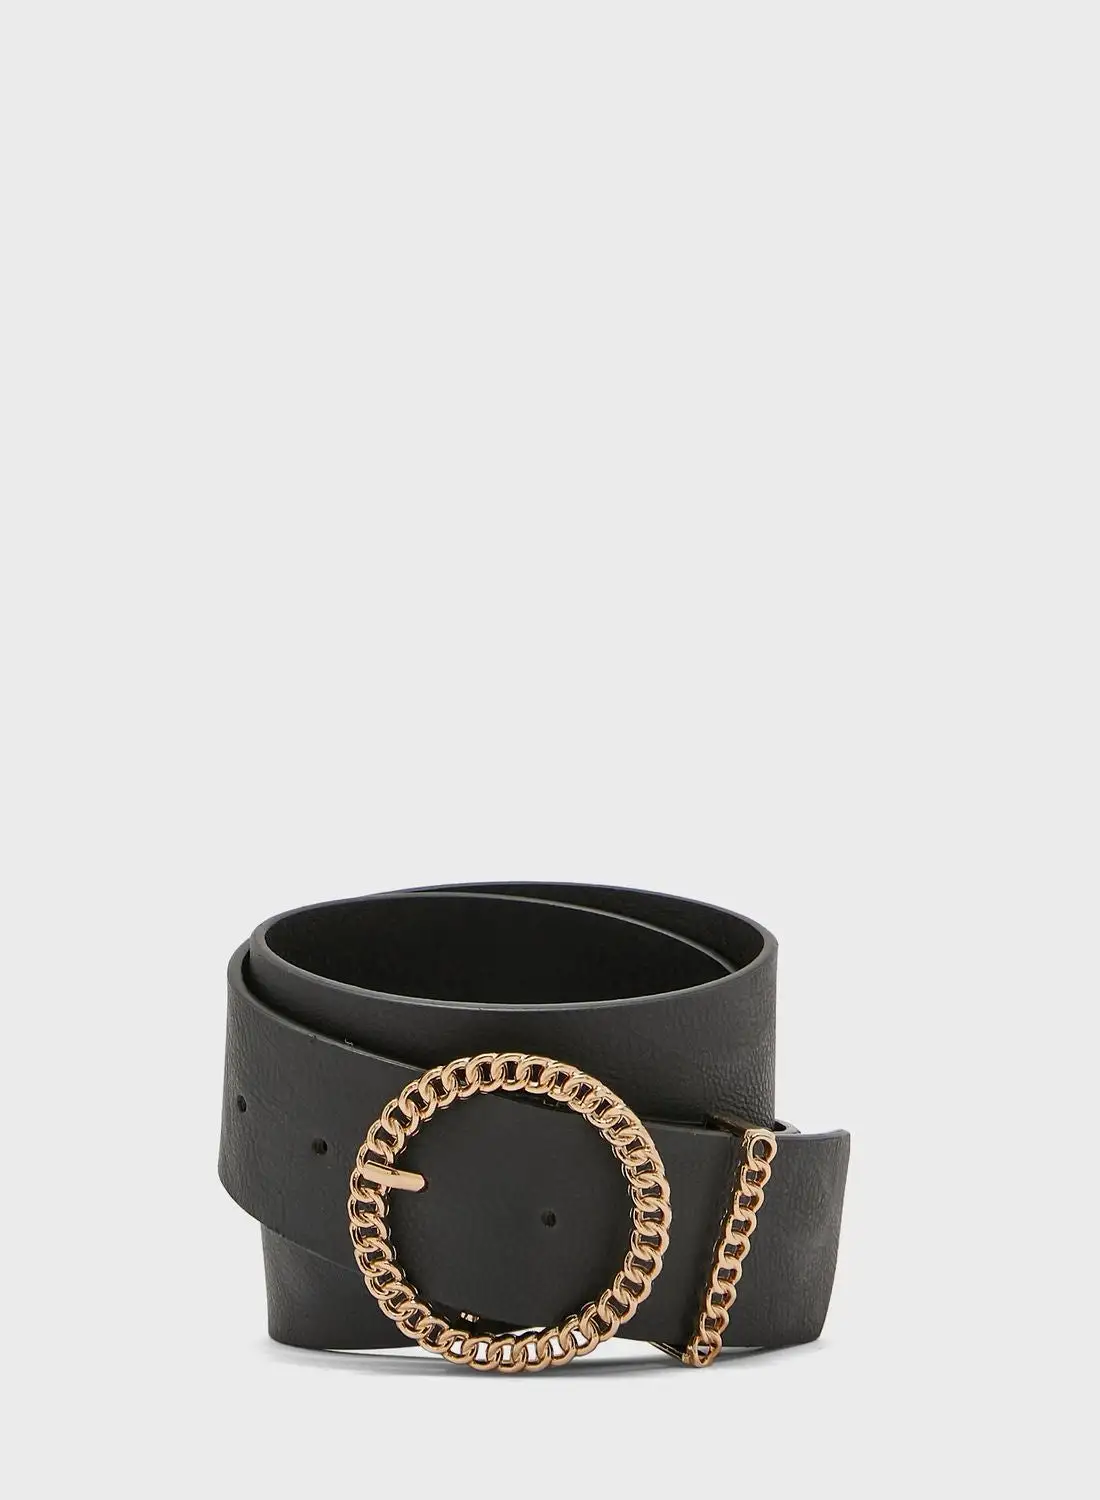 NEW LOOK Casual Circle Buckle Belt